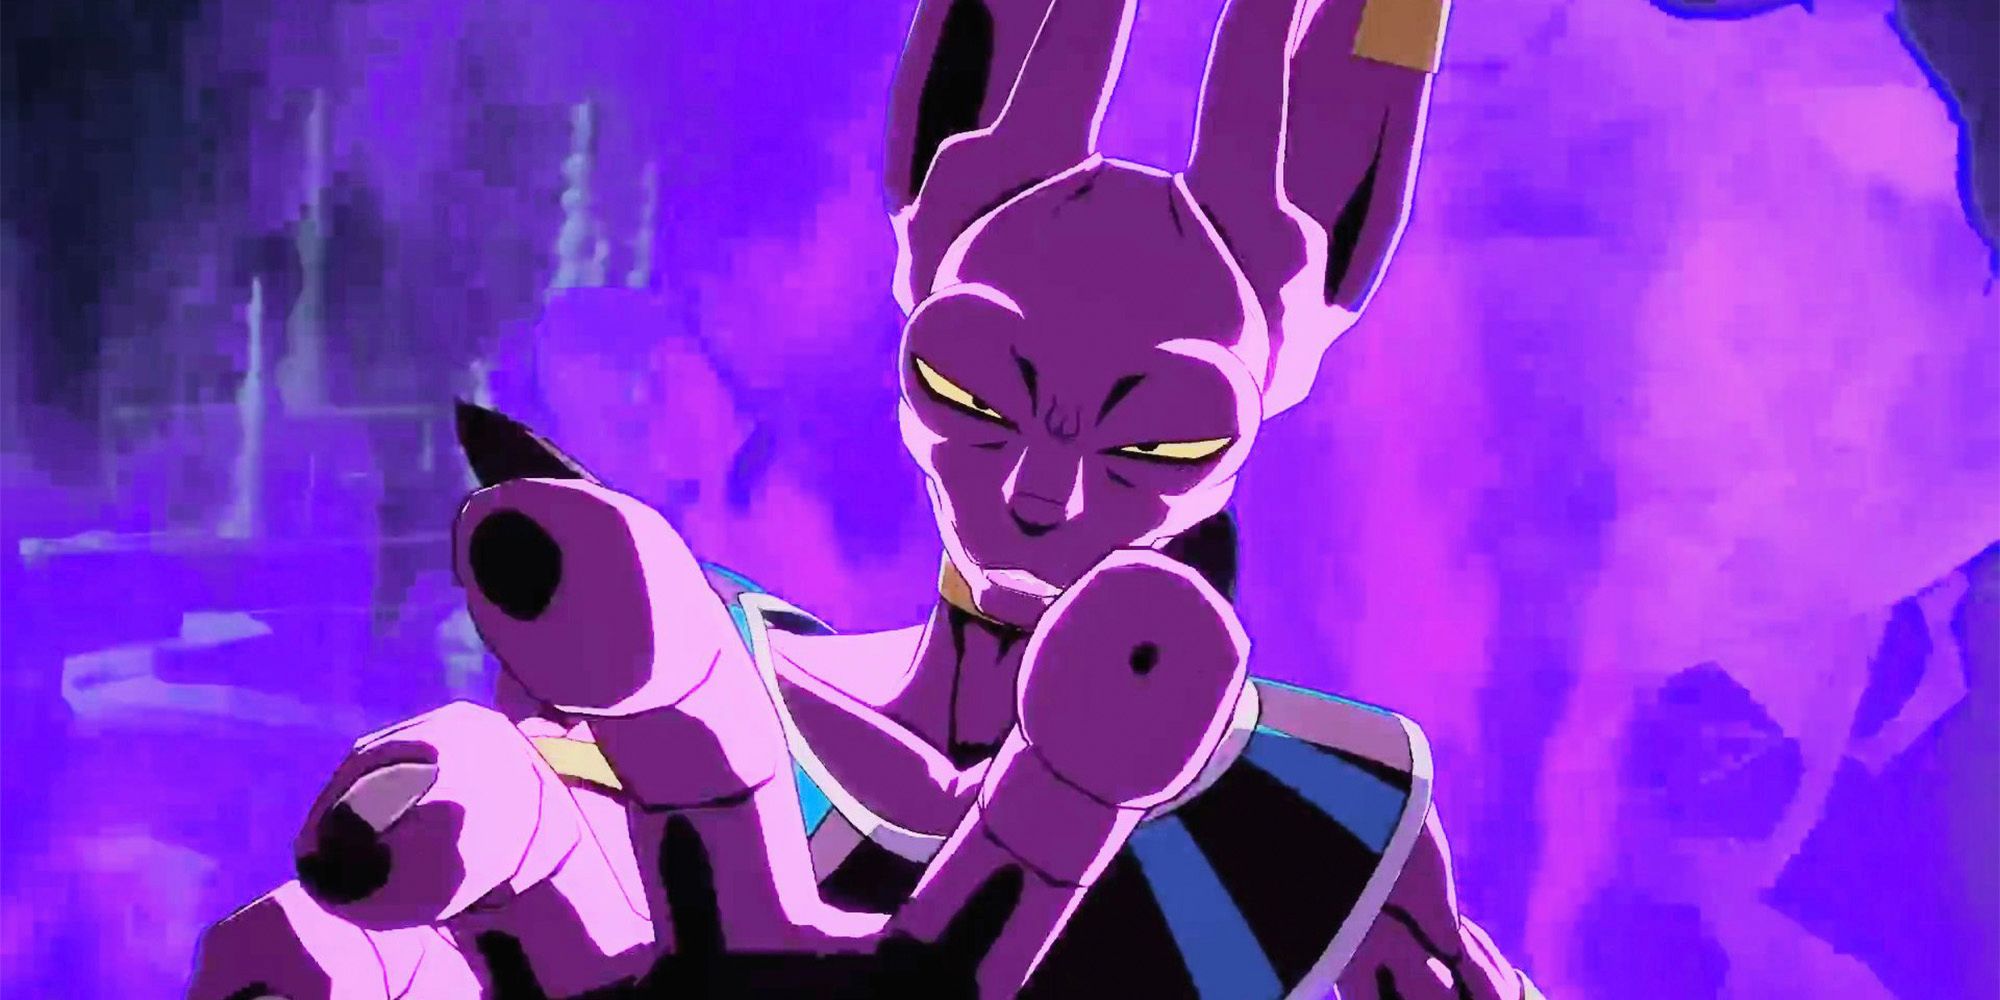 beerus preparing his special attack in dragon ball fighterz